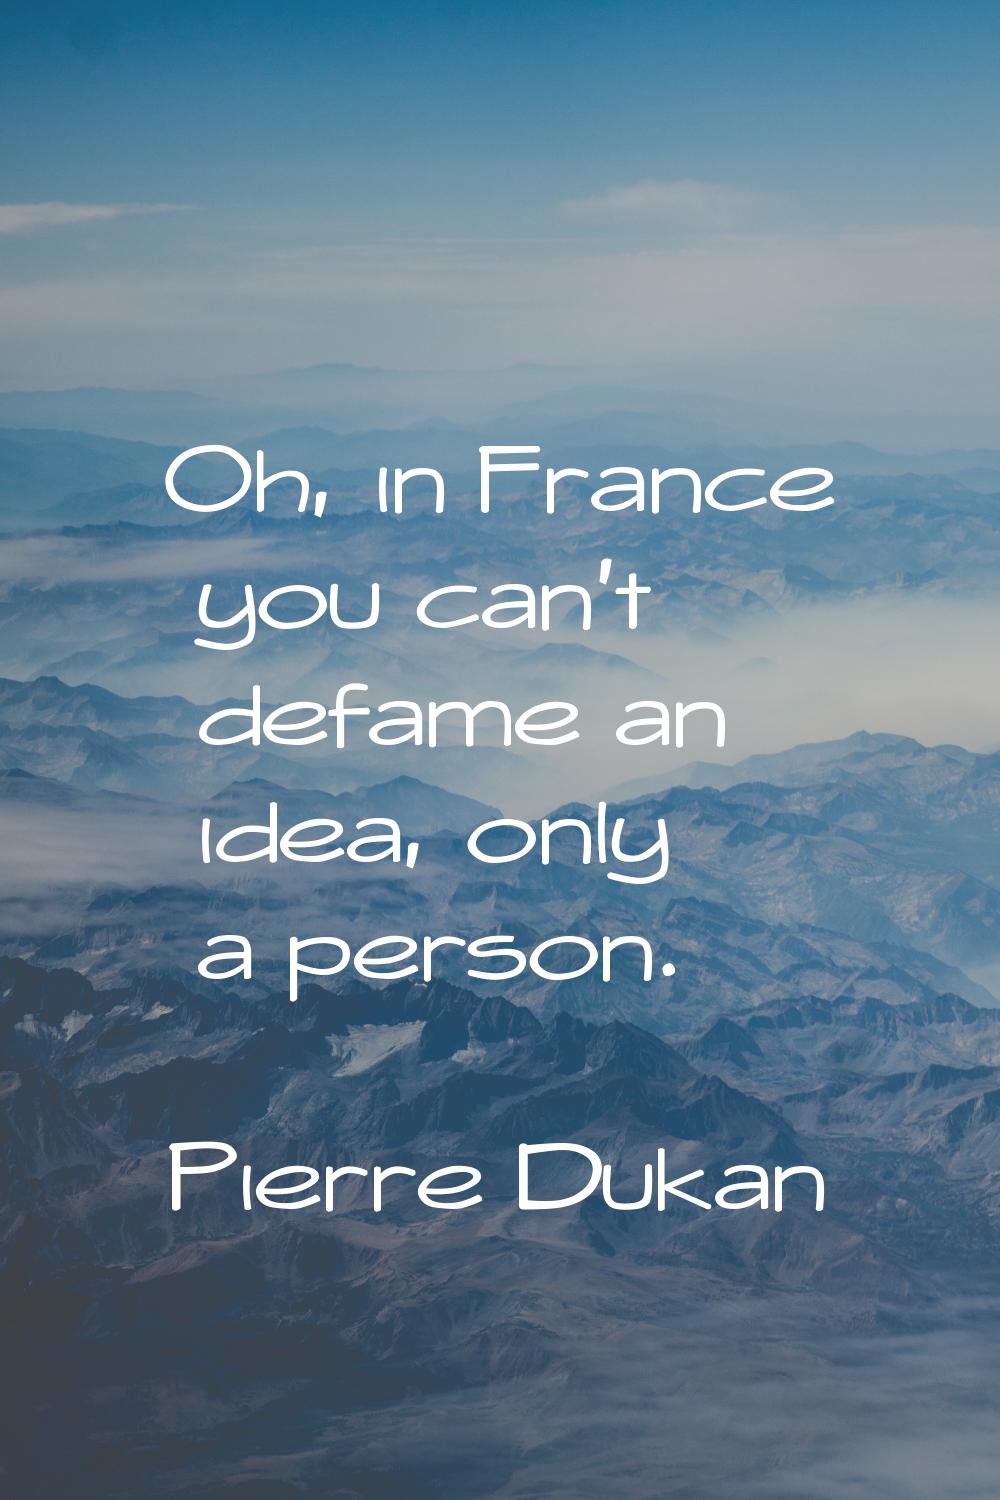 Oh, in France you can't defame an idea, only a person.